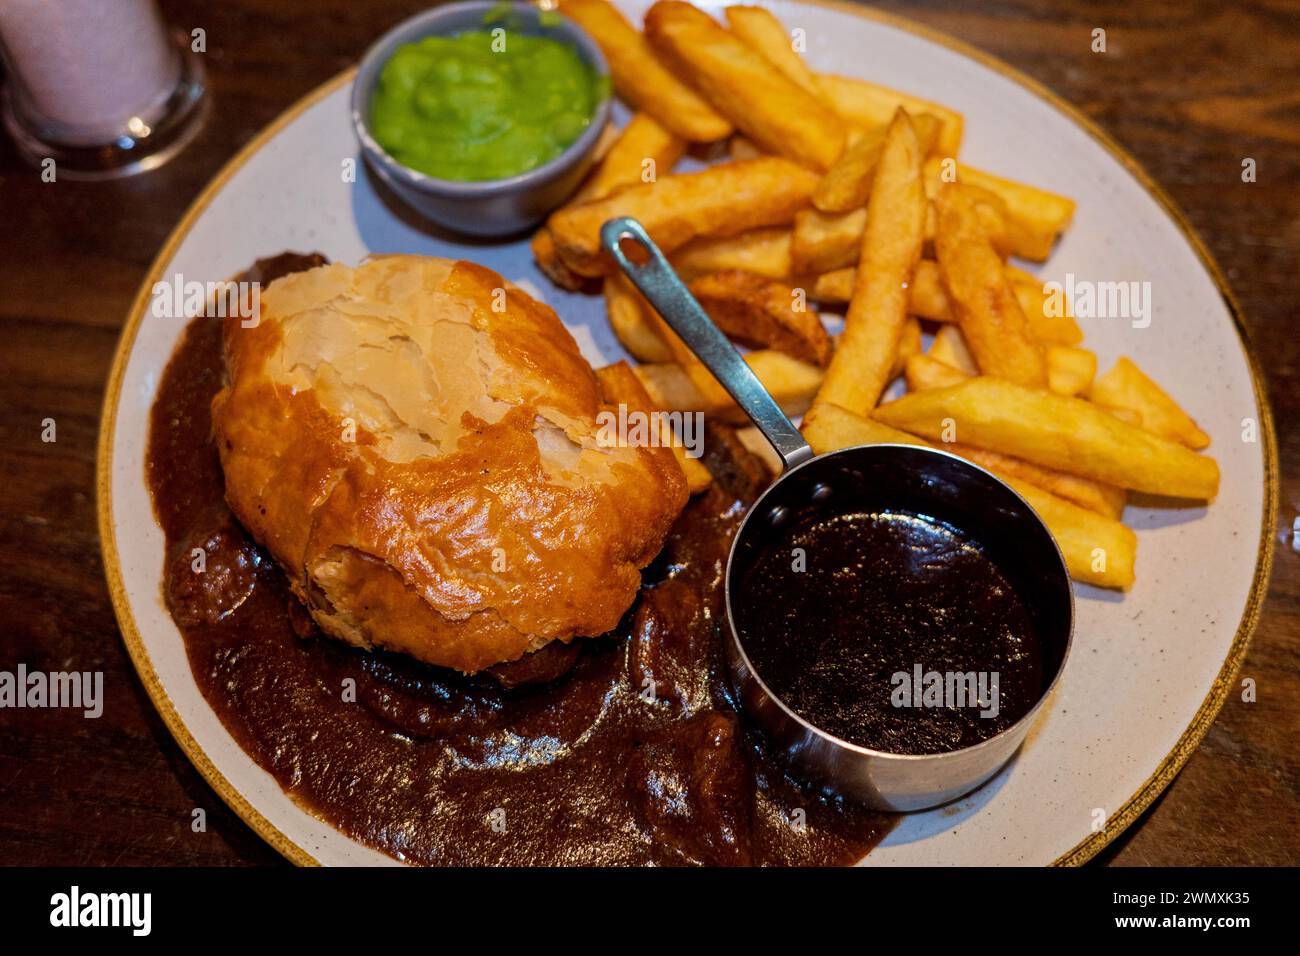 Edinburgh steak and ale pie and a pint in a Scottish pub with chips, gravy and mushy peas Stock Photo